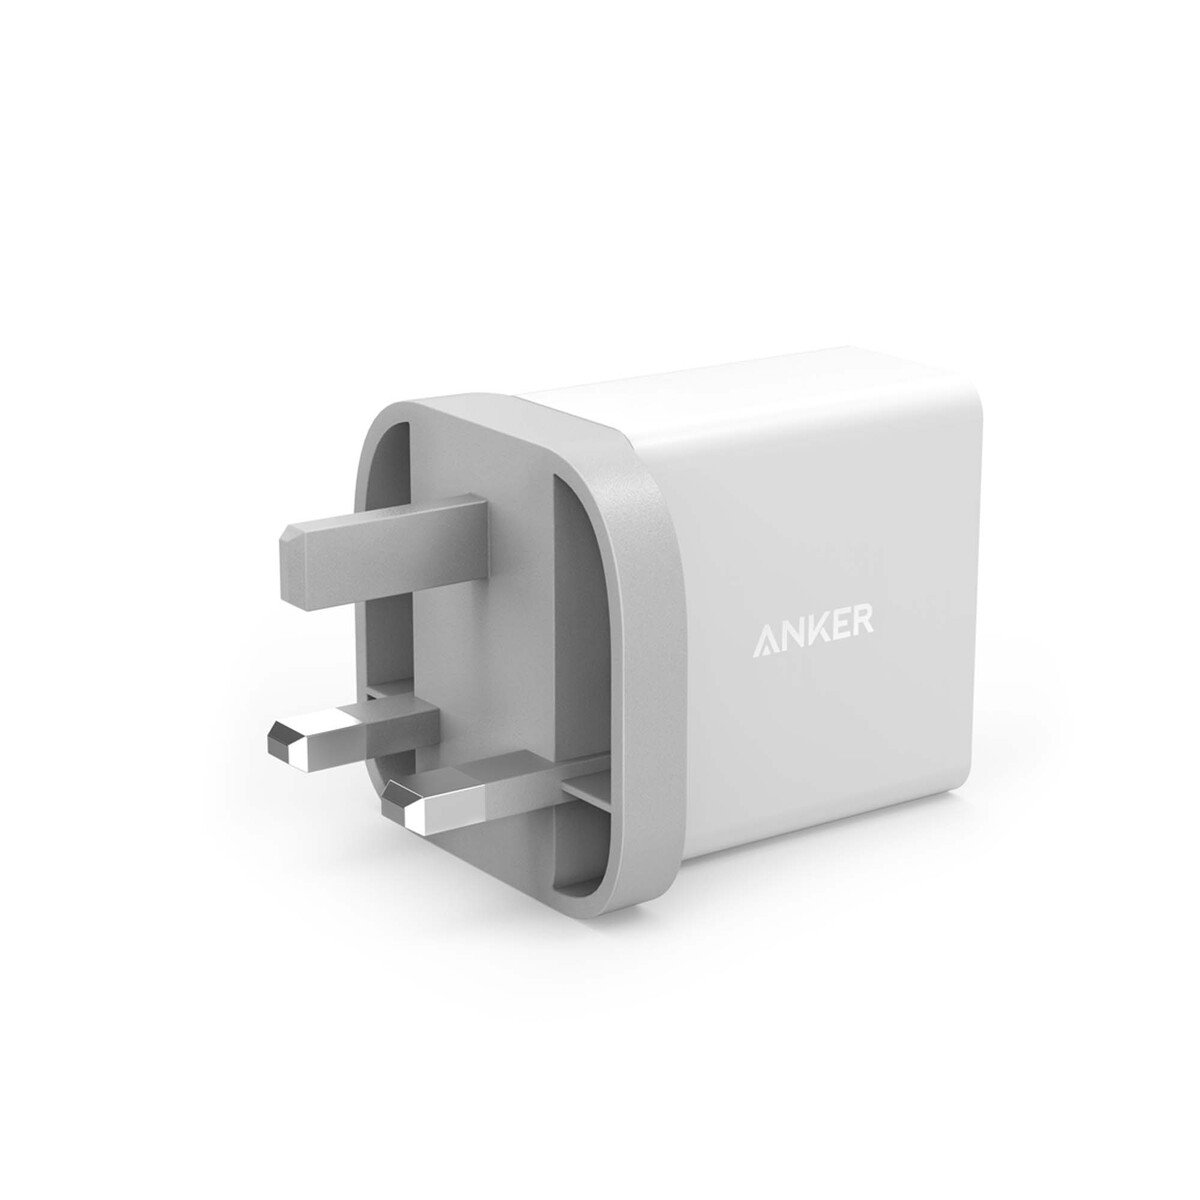 Anker 24W 2-Port USB Charger with 3ft micro USB Cable White